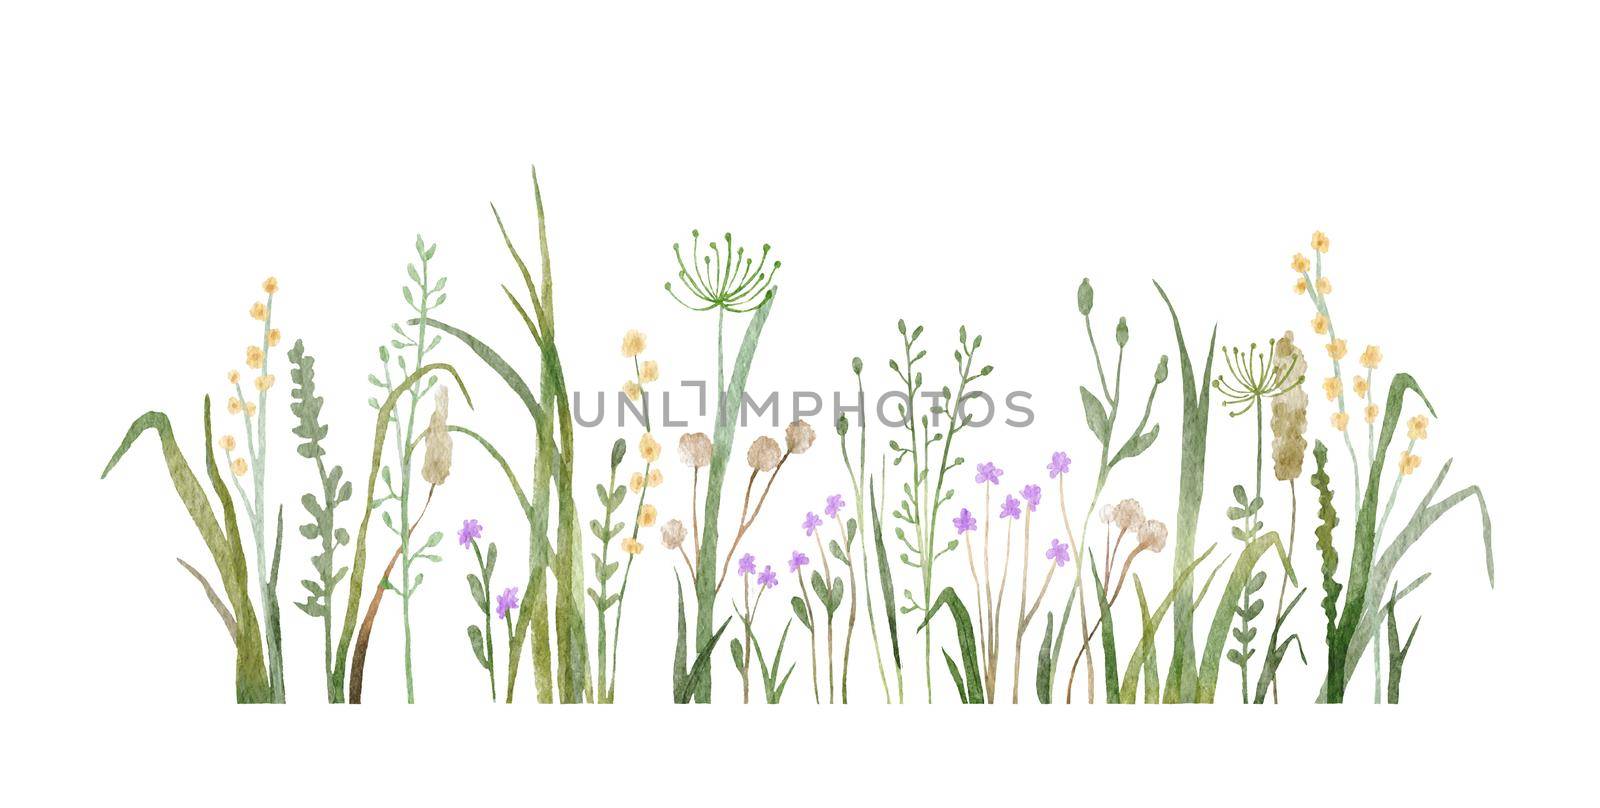 Watercolor wild herbs and flowers doodle illustration. Field with grass and wildflowers isolated on white background